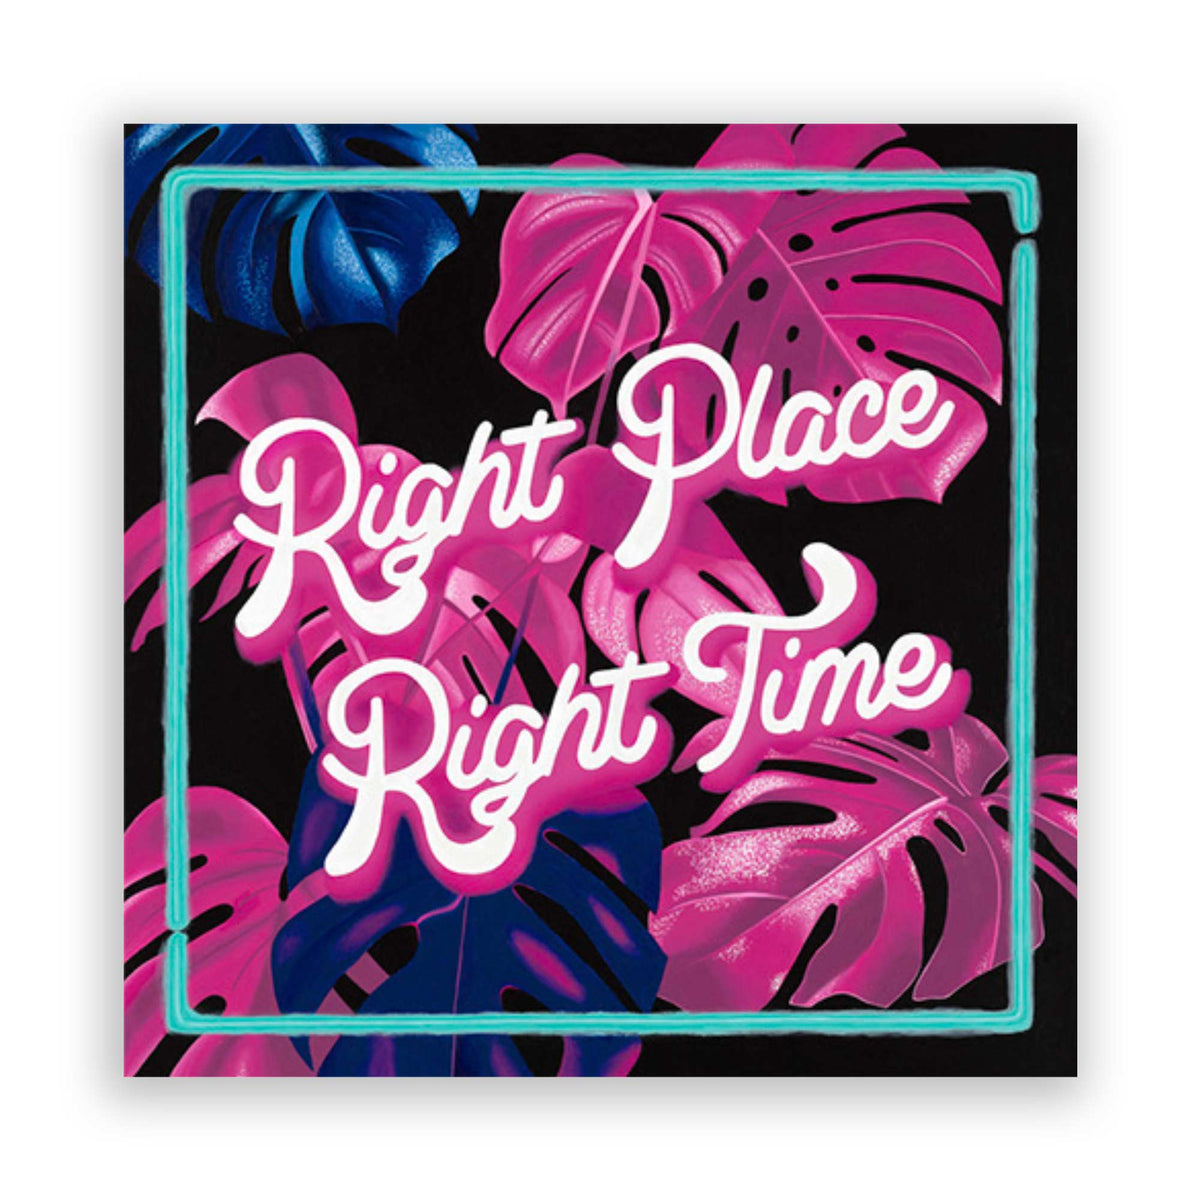 right place, right time - original artwork